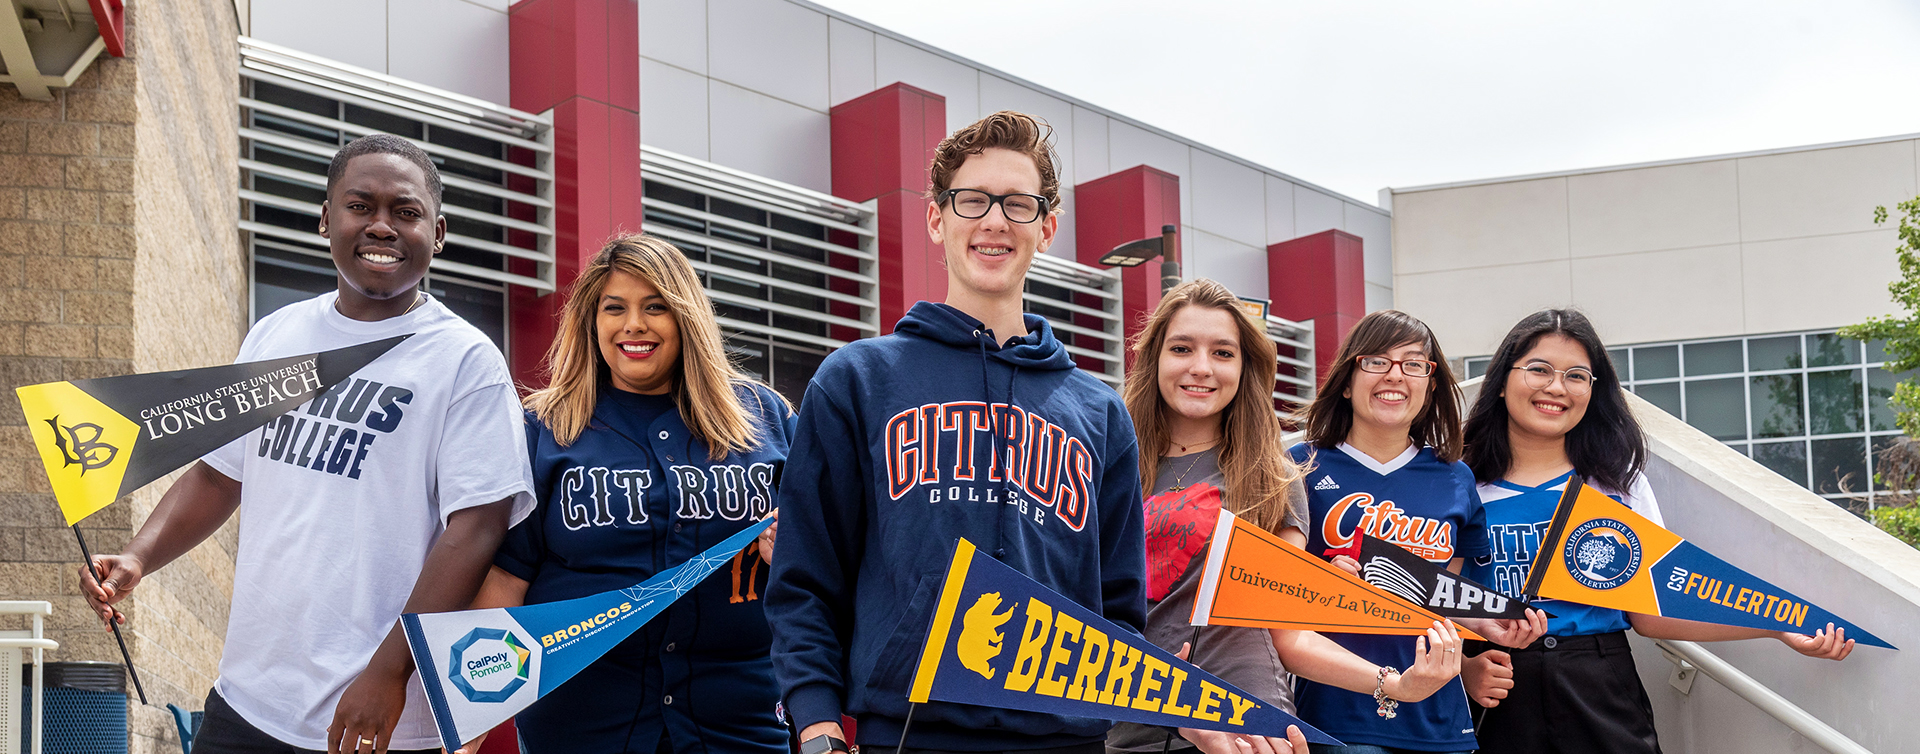 Citrus College students holding pennants to four-year college's and universities